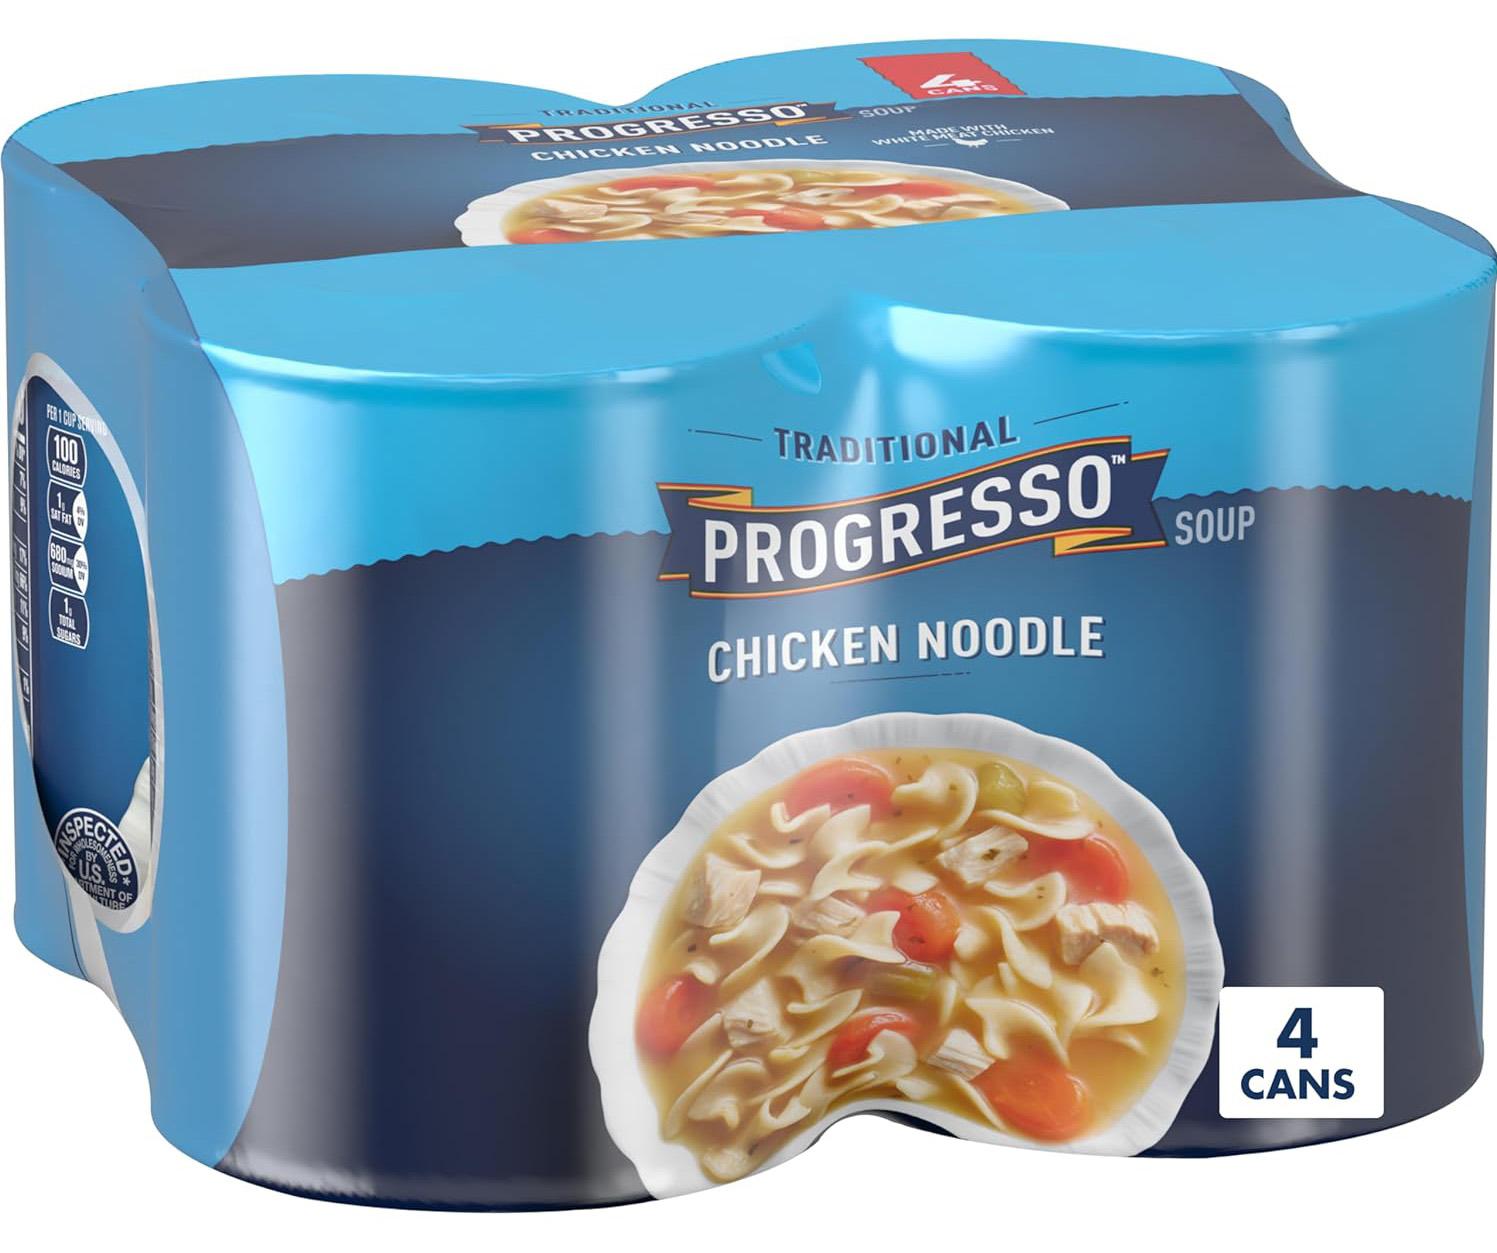 Progresso Traditional Chicken Noodle Soup 4 Pack for $5.88